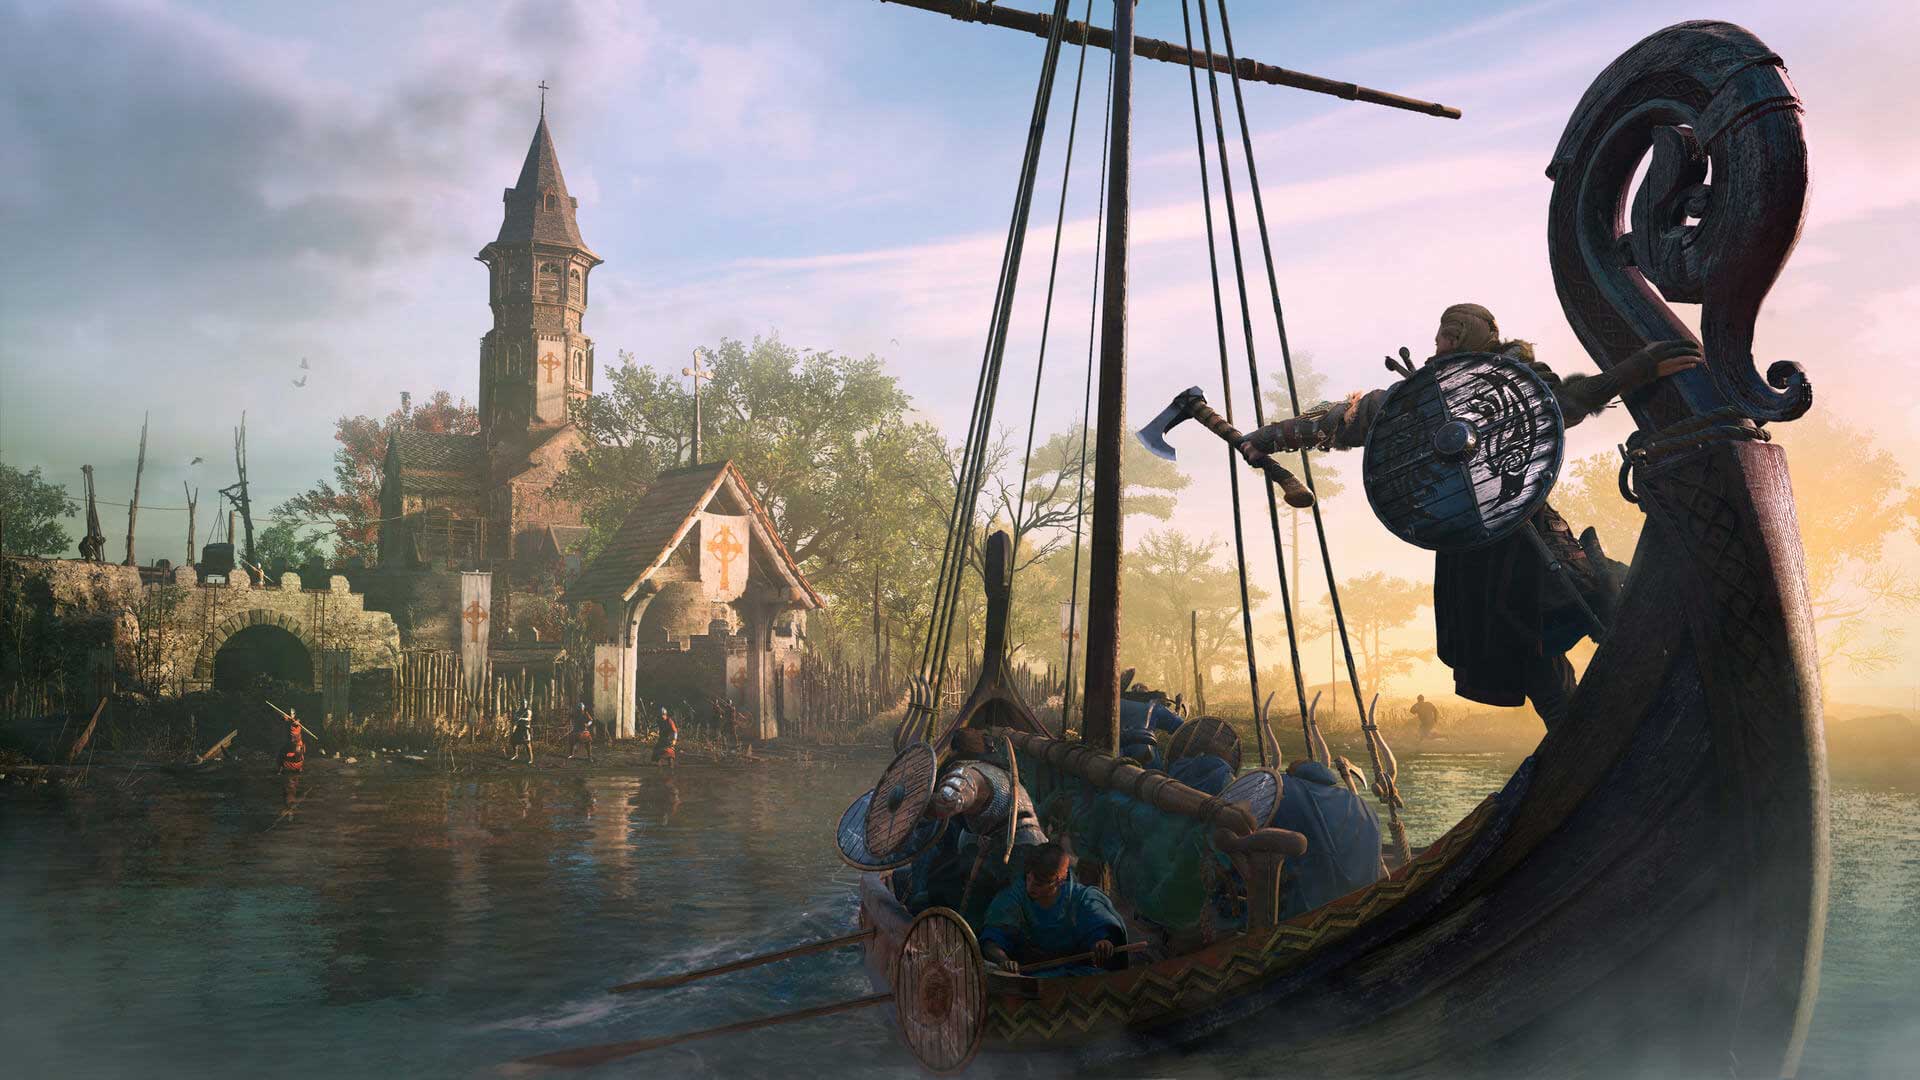 Assassin’s Creed Valhalla Update 1.1.2 Brings New Skills and River Raids